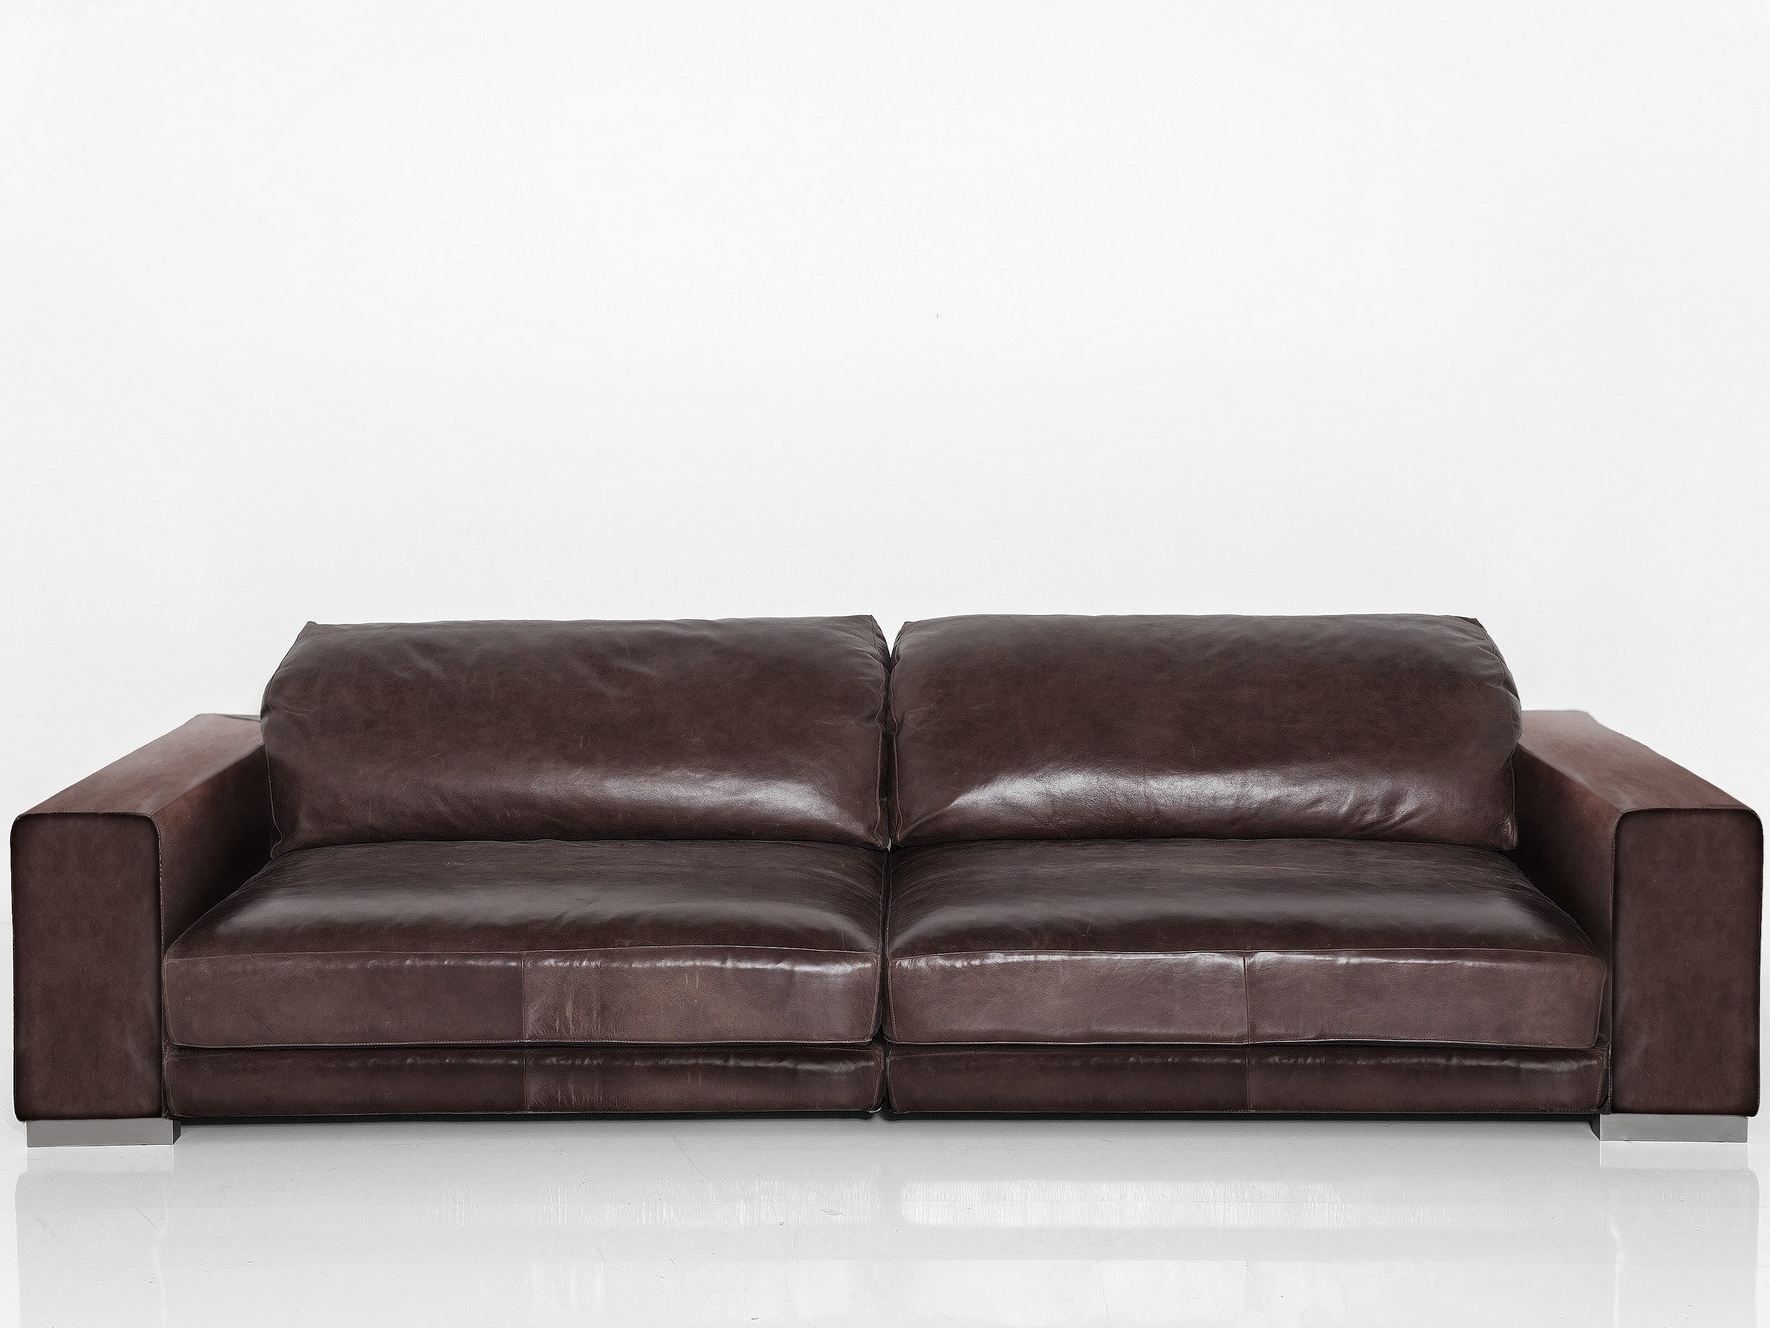 Kare Design Sofas Archiproducts Throughout 4 Seat Leather Sofas (View 9 of 15)